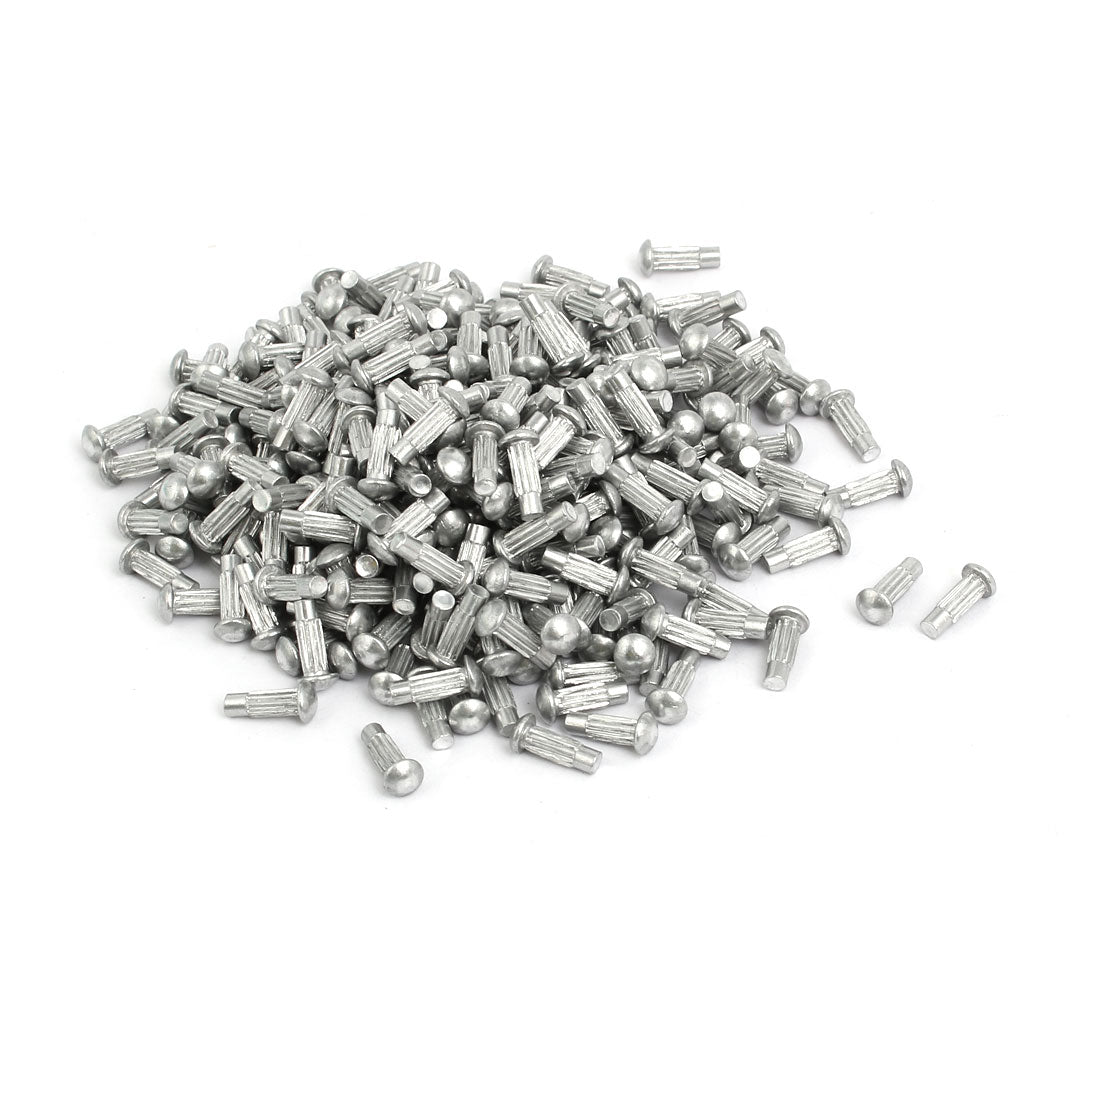 uxcell Uxcell 200pcs M2.5 x 8mm Knurled Shank Round Head Aluminum Solid Rivet Silver Tone